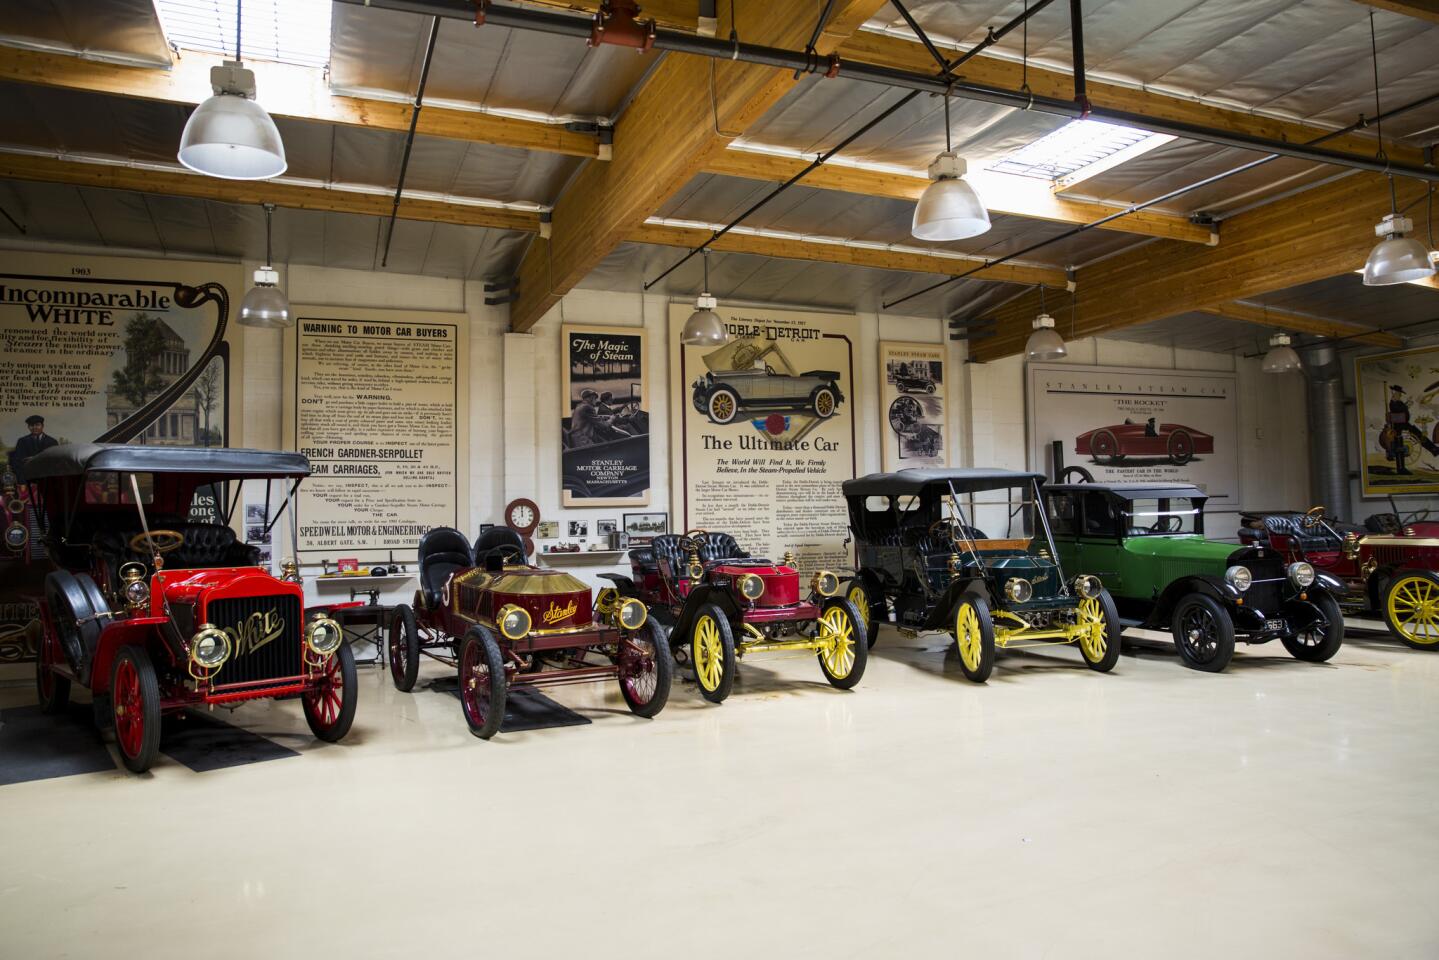 A visit to Jay Leno's garage